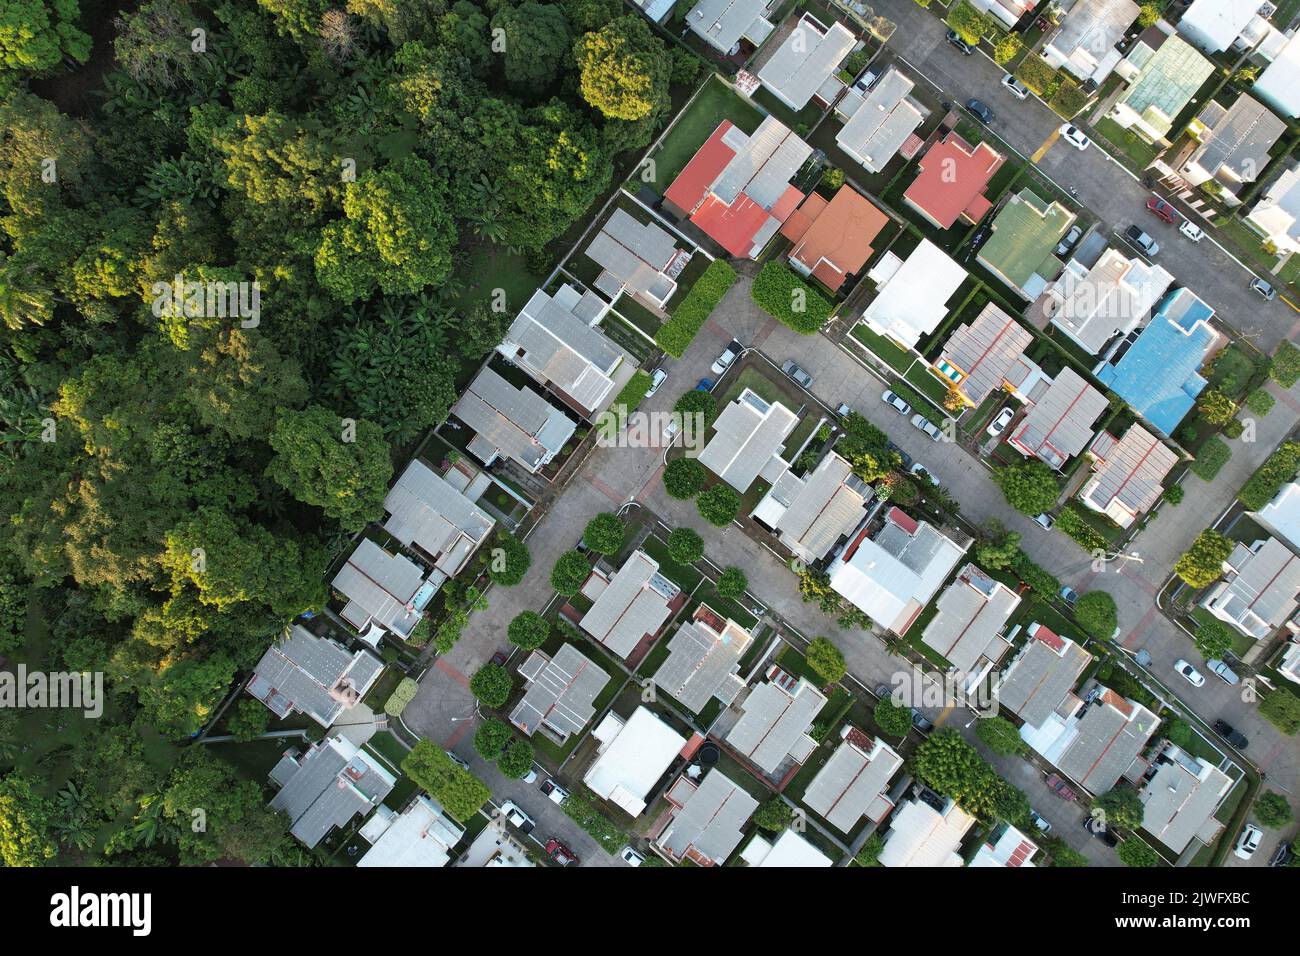 Residential area next to green park copy space aerial drone top view Stock Photo